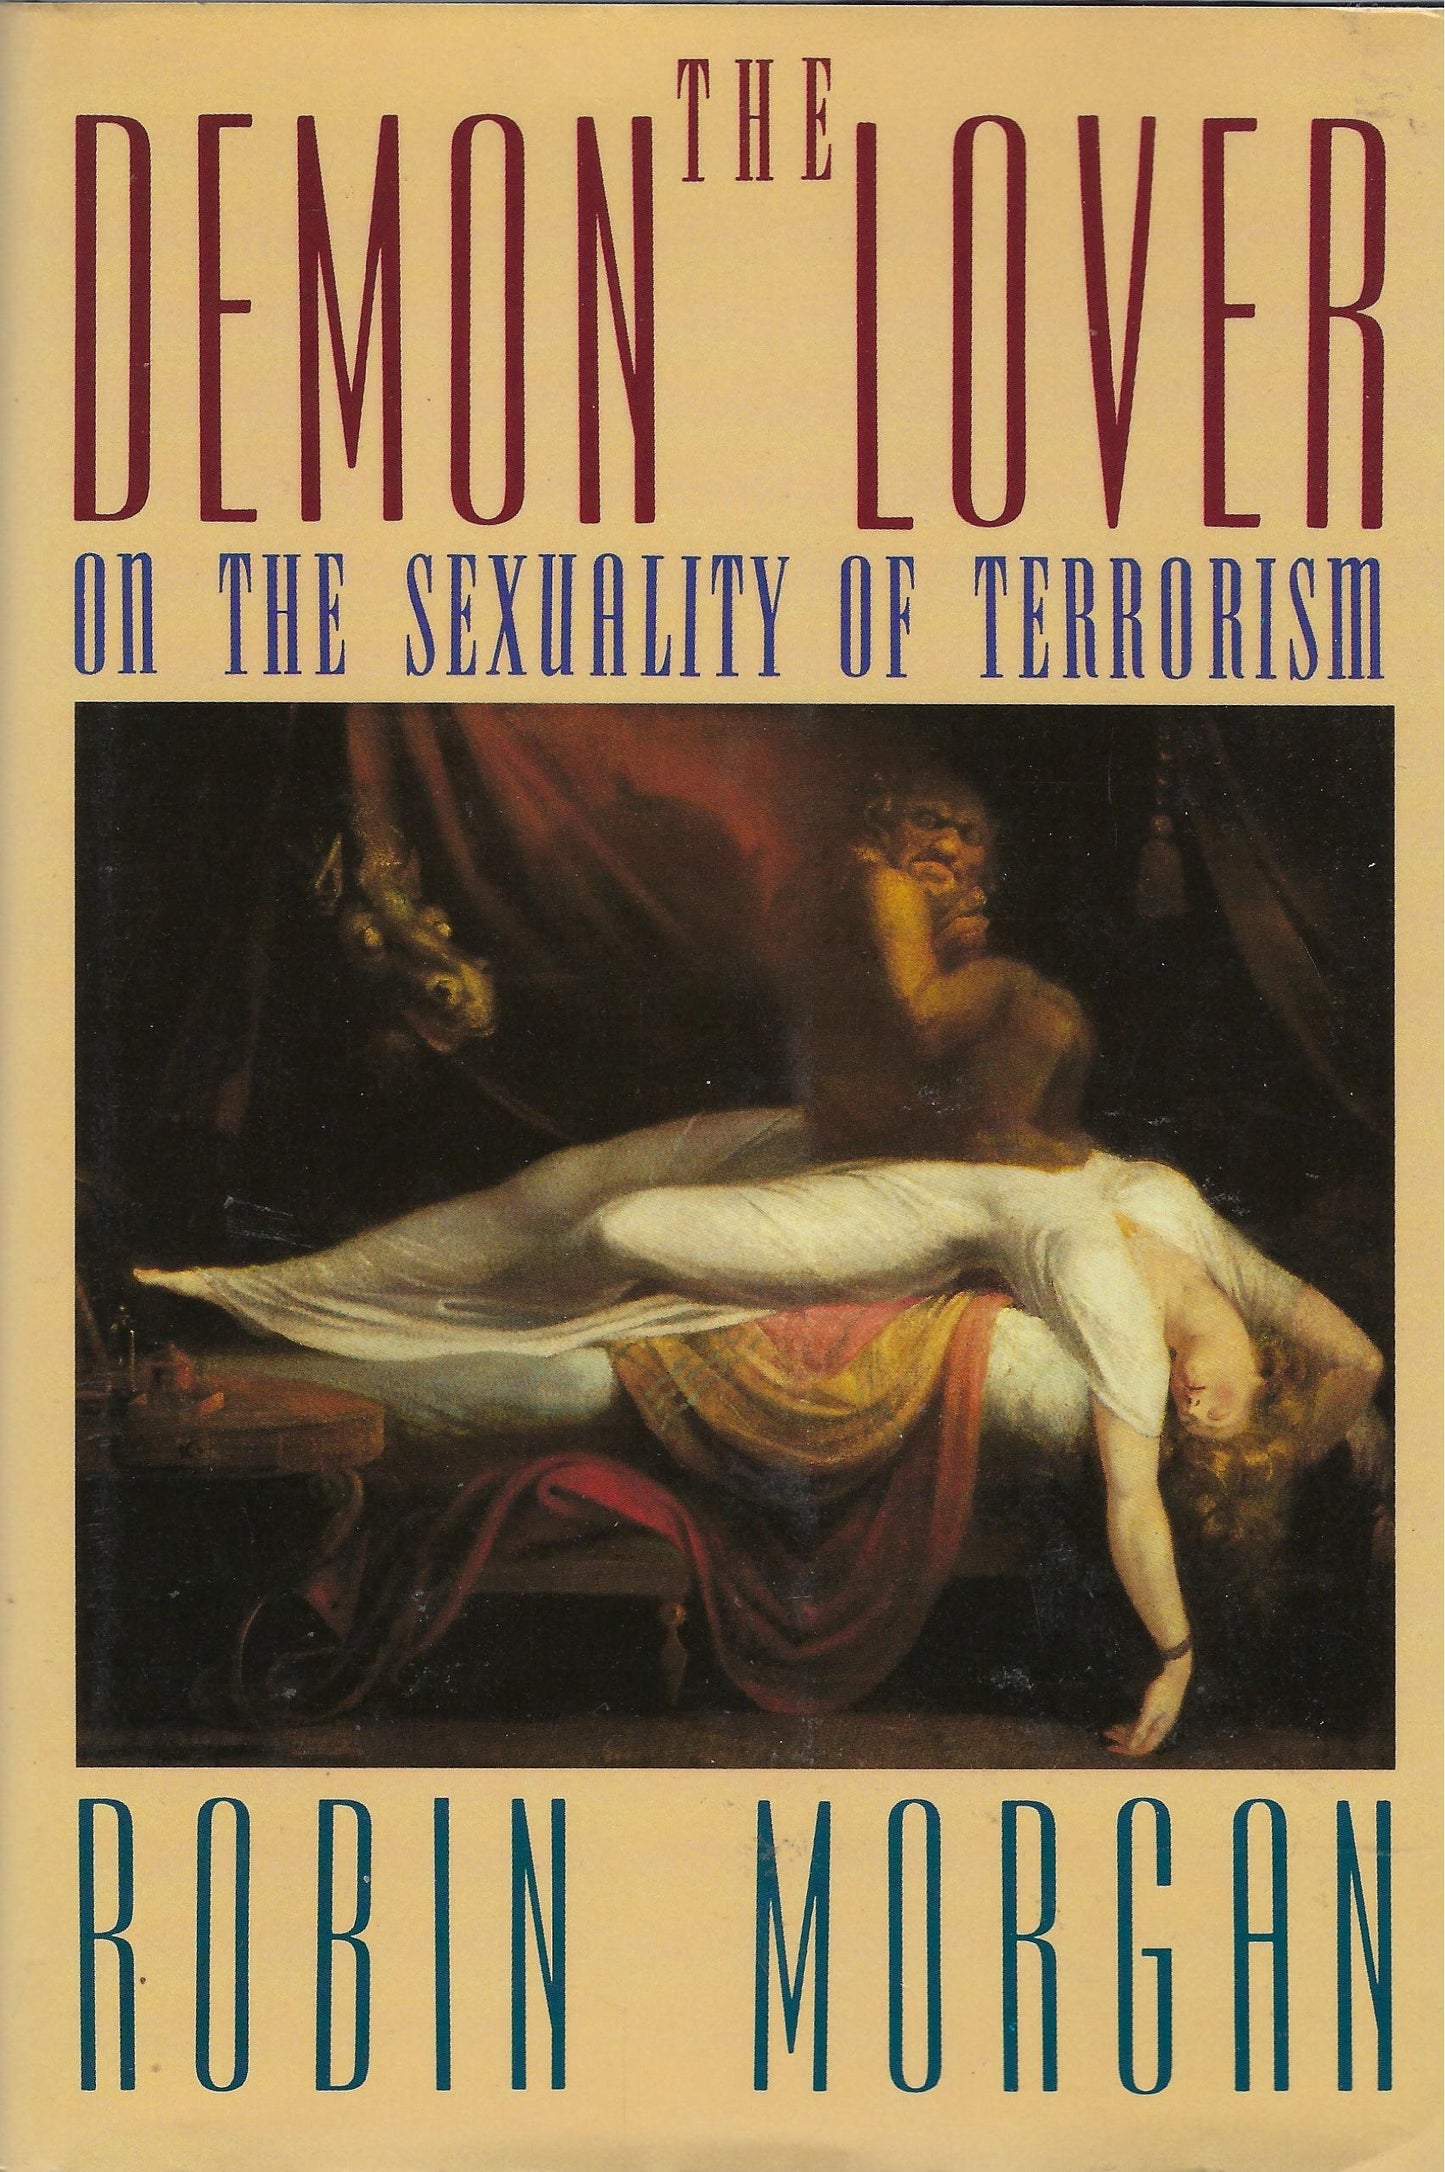 The Demon Lover, on the sexuality of terrorism